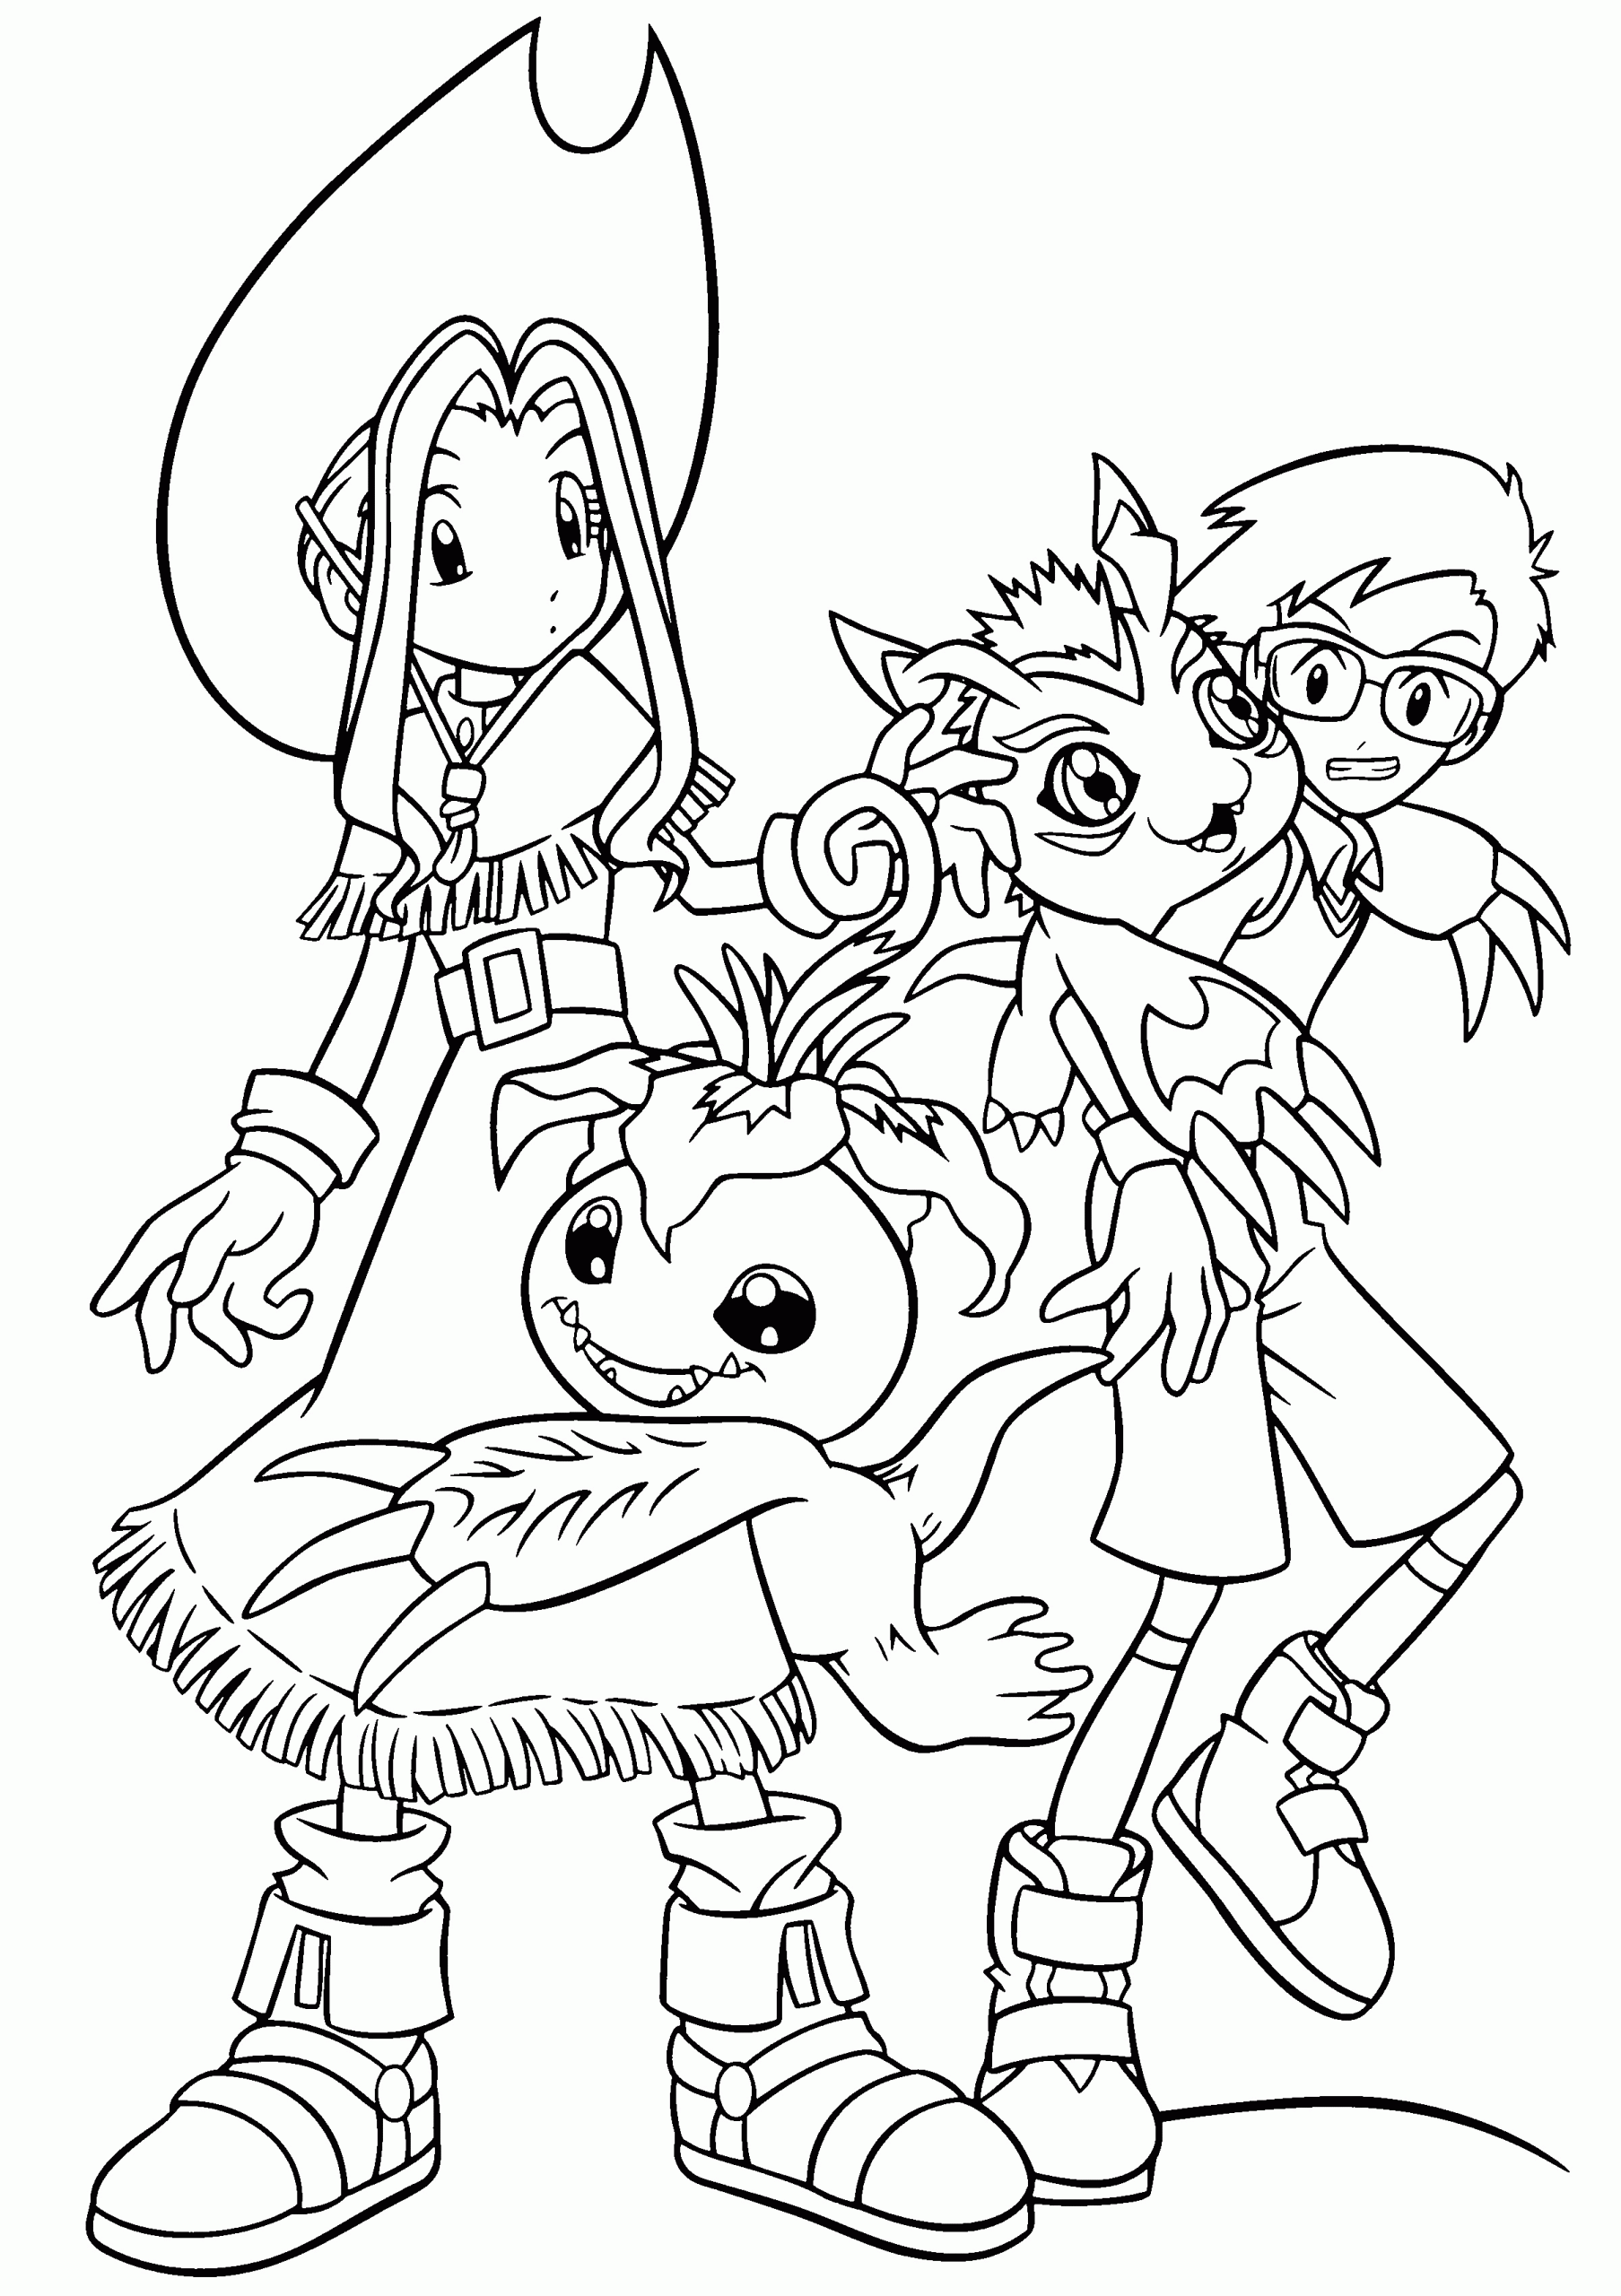 Coloring Book For Toddlers Free
 Free Printable Digimon Coloring Pages For Kids